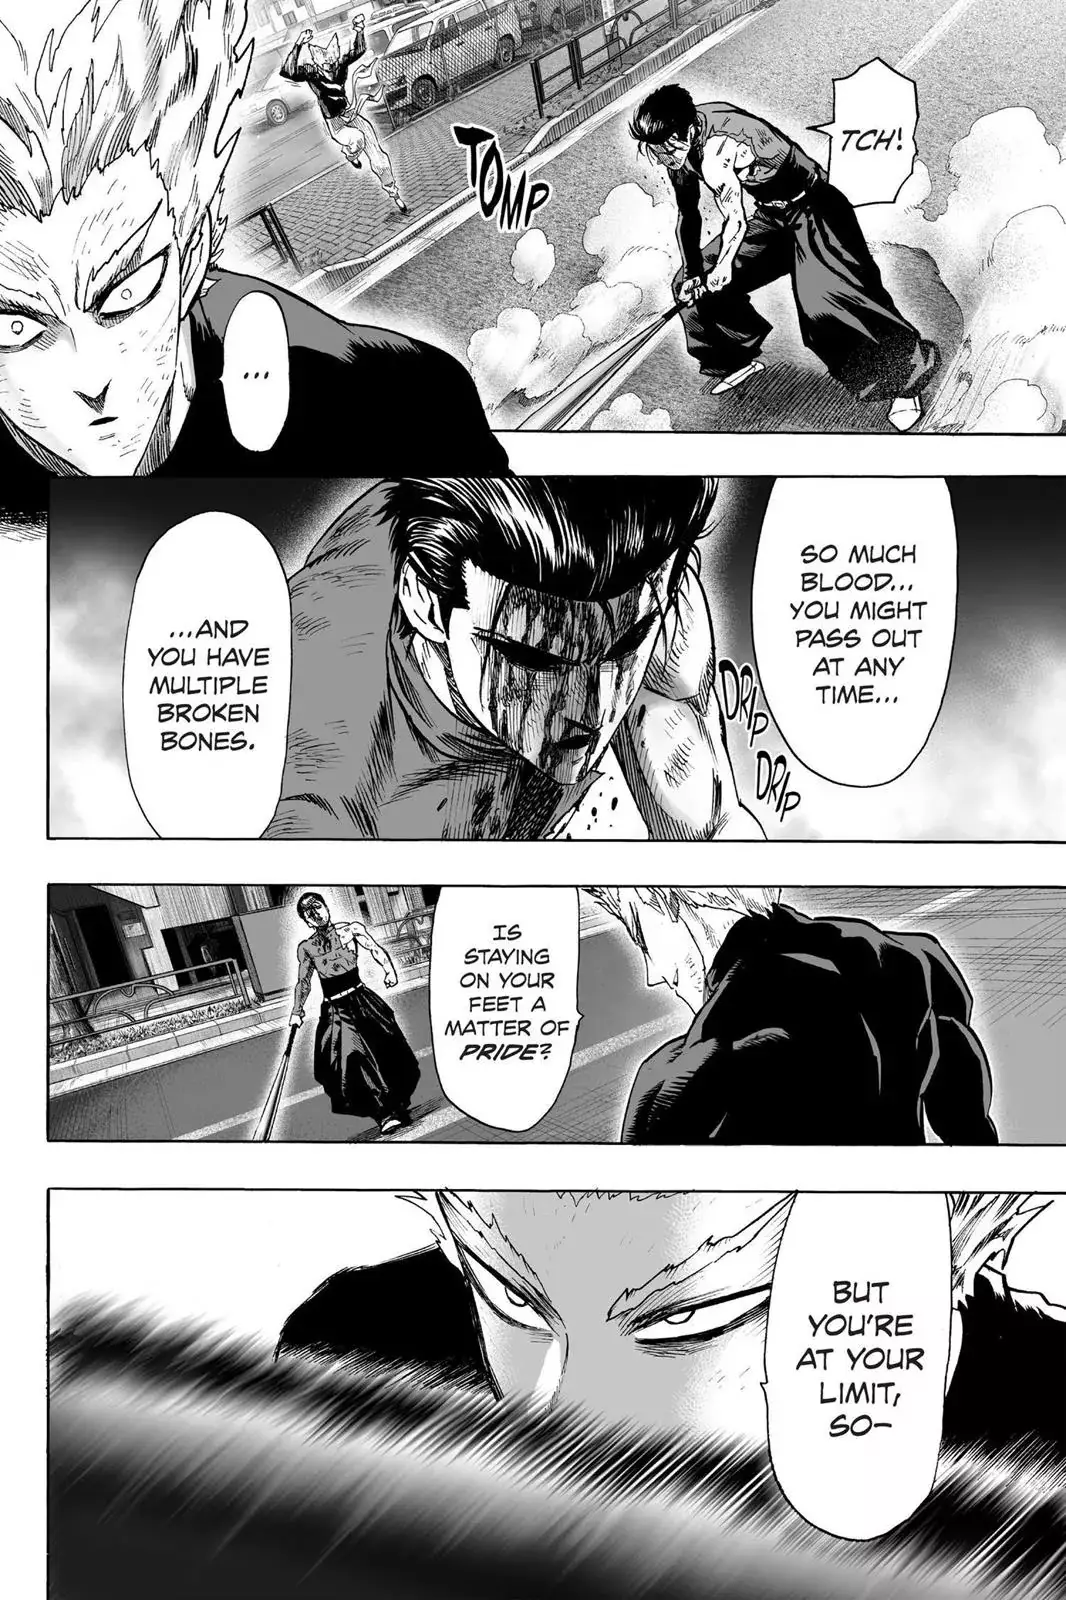 One Punch Man Chapter 58, READ One Punch Man Chapter 58 ONLINE, lost in the cloud genre,lost in the cloud gif,lost in the cloud girl,lost in the cloud goods,lost in the cloud goodreads,lost in the cloud,lost ark cloud gaming,lost odyssey cloud gaming,lost in the cloud fanart,lost in the cloud fanfic,lost in the cloud fandom,lost in the cloud first kiss,lost in the cloud font,lost in the cloud ending,lost in the cloud episode 97,lost in the cloud edit,lost in the cloud explained,lost in the cloud dog,lost in the cloud discord server,lost in the cloud desktop wallpaper,lost in the cloud drawing,can't find my cloud on network,lost in the cloud characters,lost in the cloud chapter 93 release date,lost in the cloud birthday,lost in the cloud birthday art,lost in the cloud background,lost in the cloud banner,lost in the clouds meaning,what is the black cloud in lost,lost in the cloud ao3,lost in the cloud anime,lost in the cloud art,lost in the cloud author twitter,lost in the cloud author instagram,lost in the cloud artist,lost in the cloud acrylic stand,lost in the cloud artist twitter,lost in the cloud art style,lost in the cloud analysis